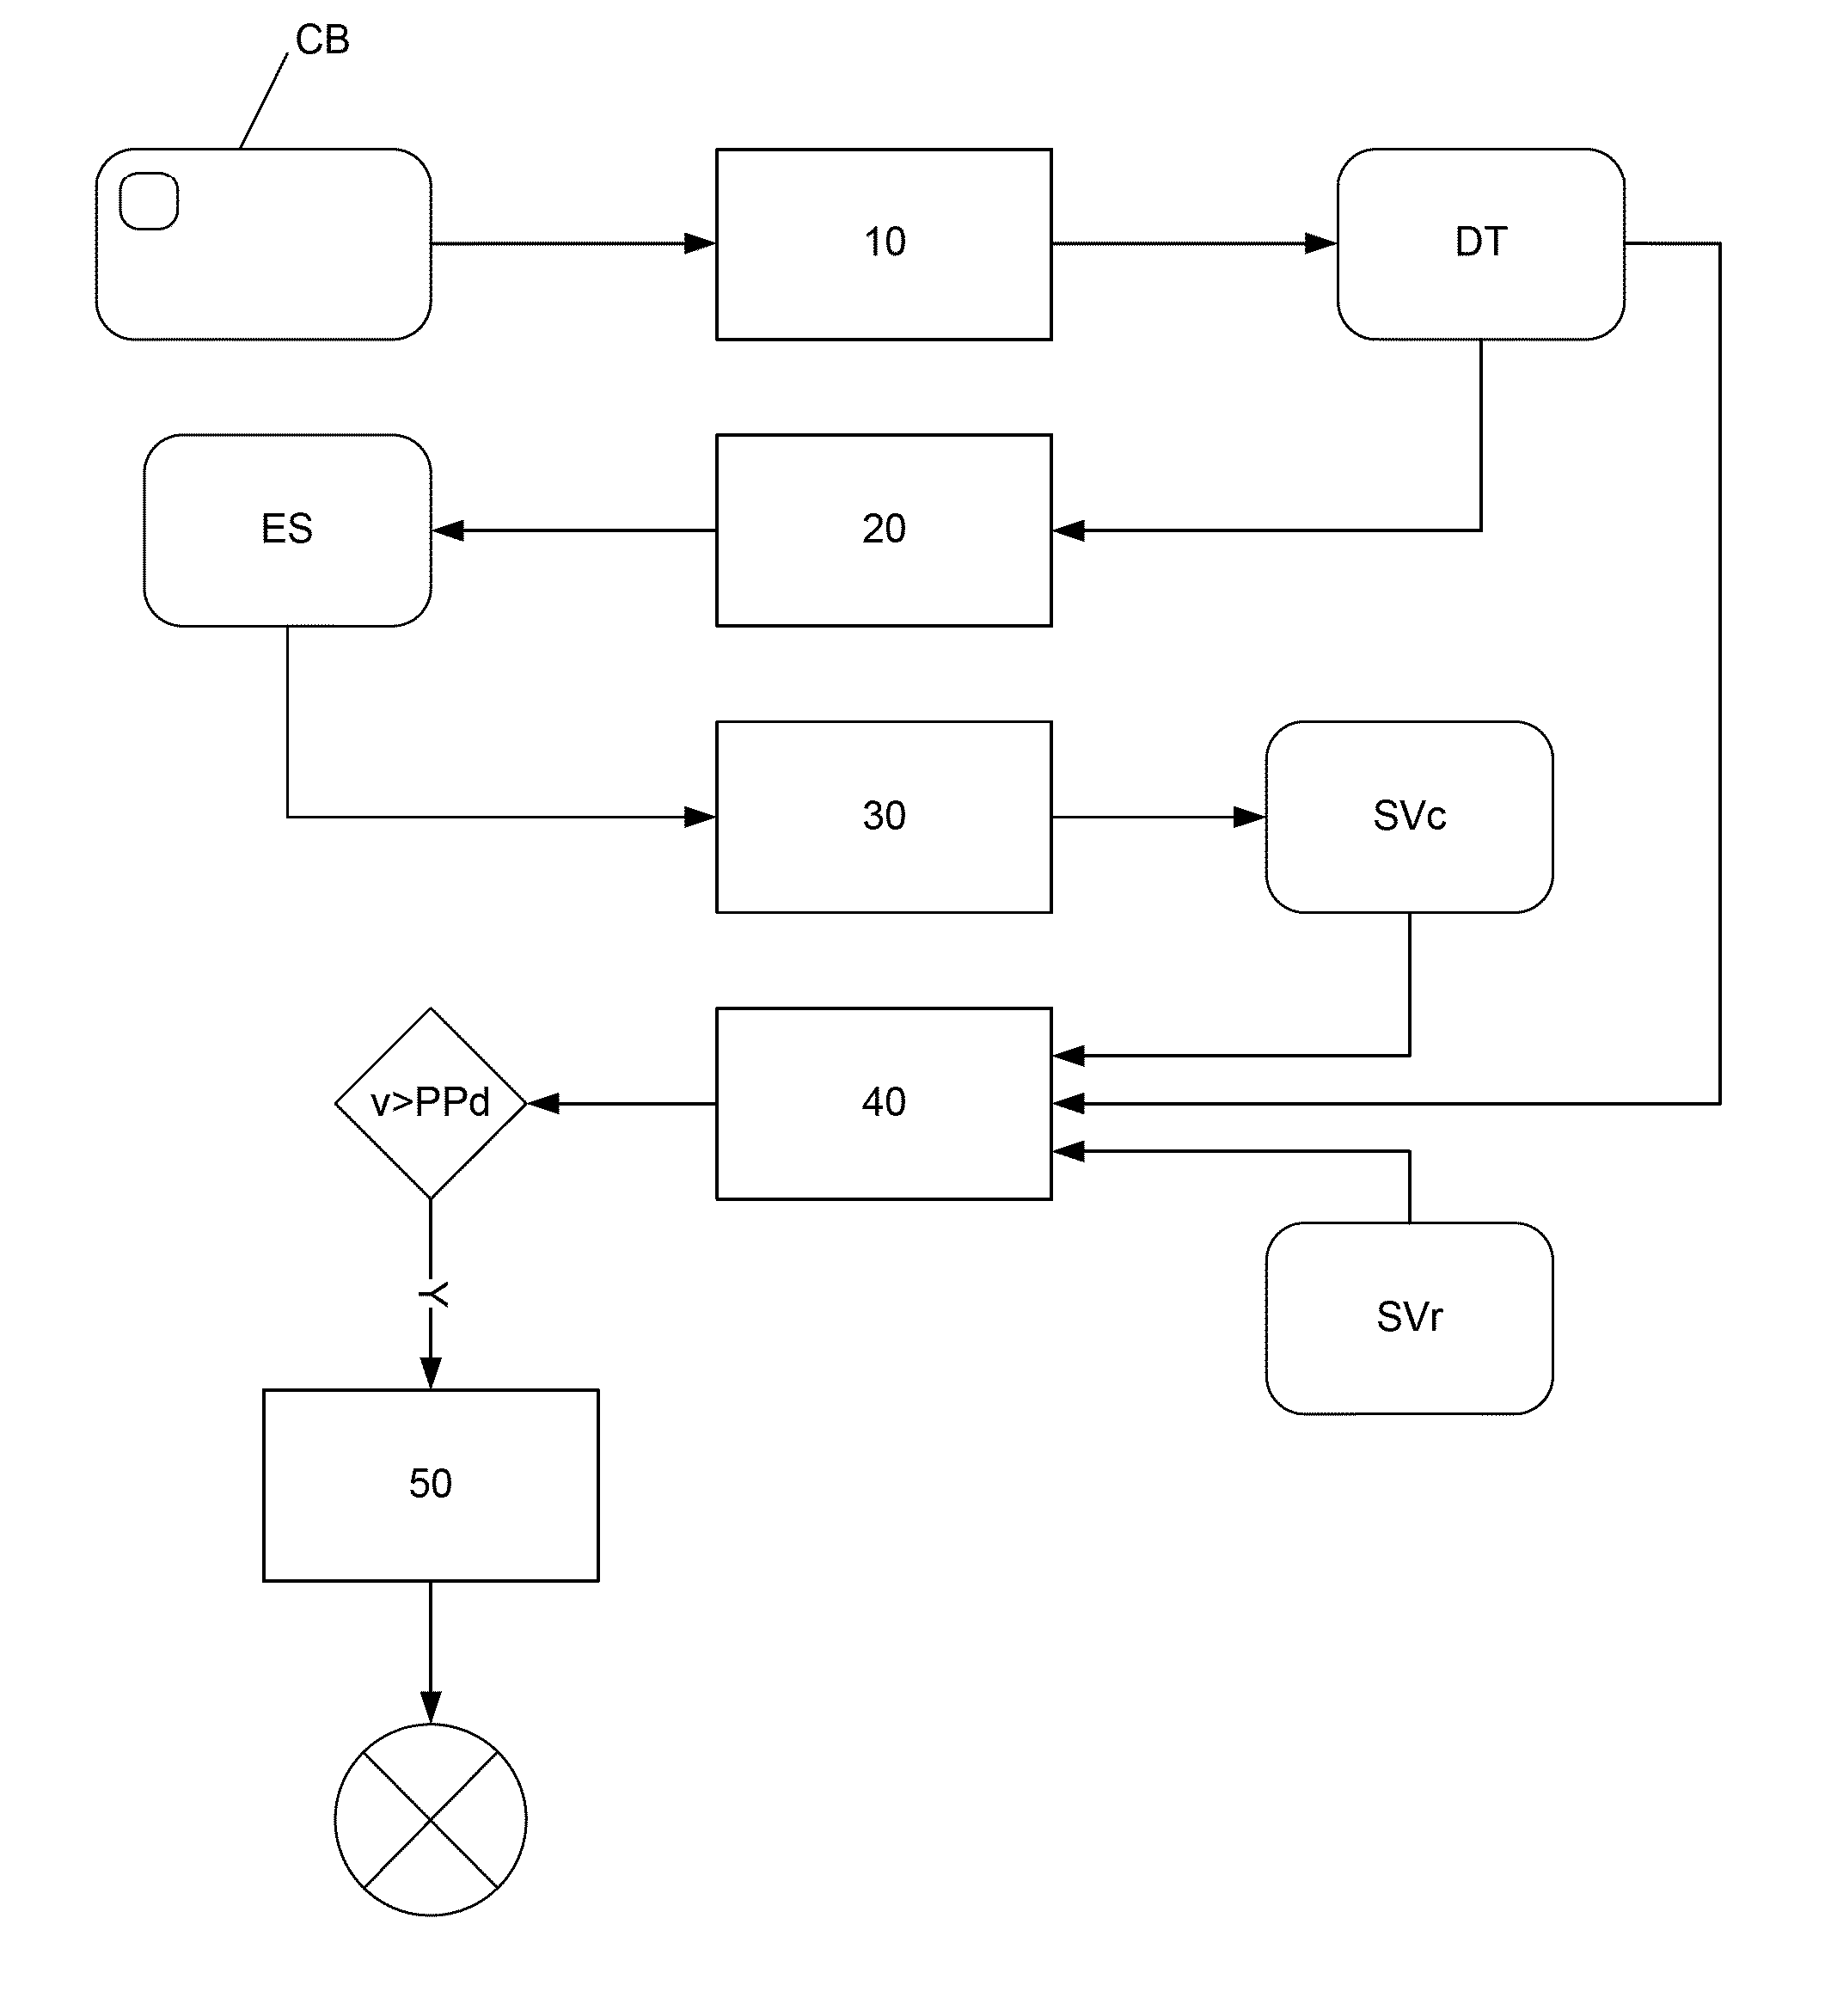 Method for Securing a Transaction Performed by Bank Card